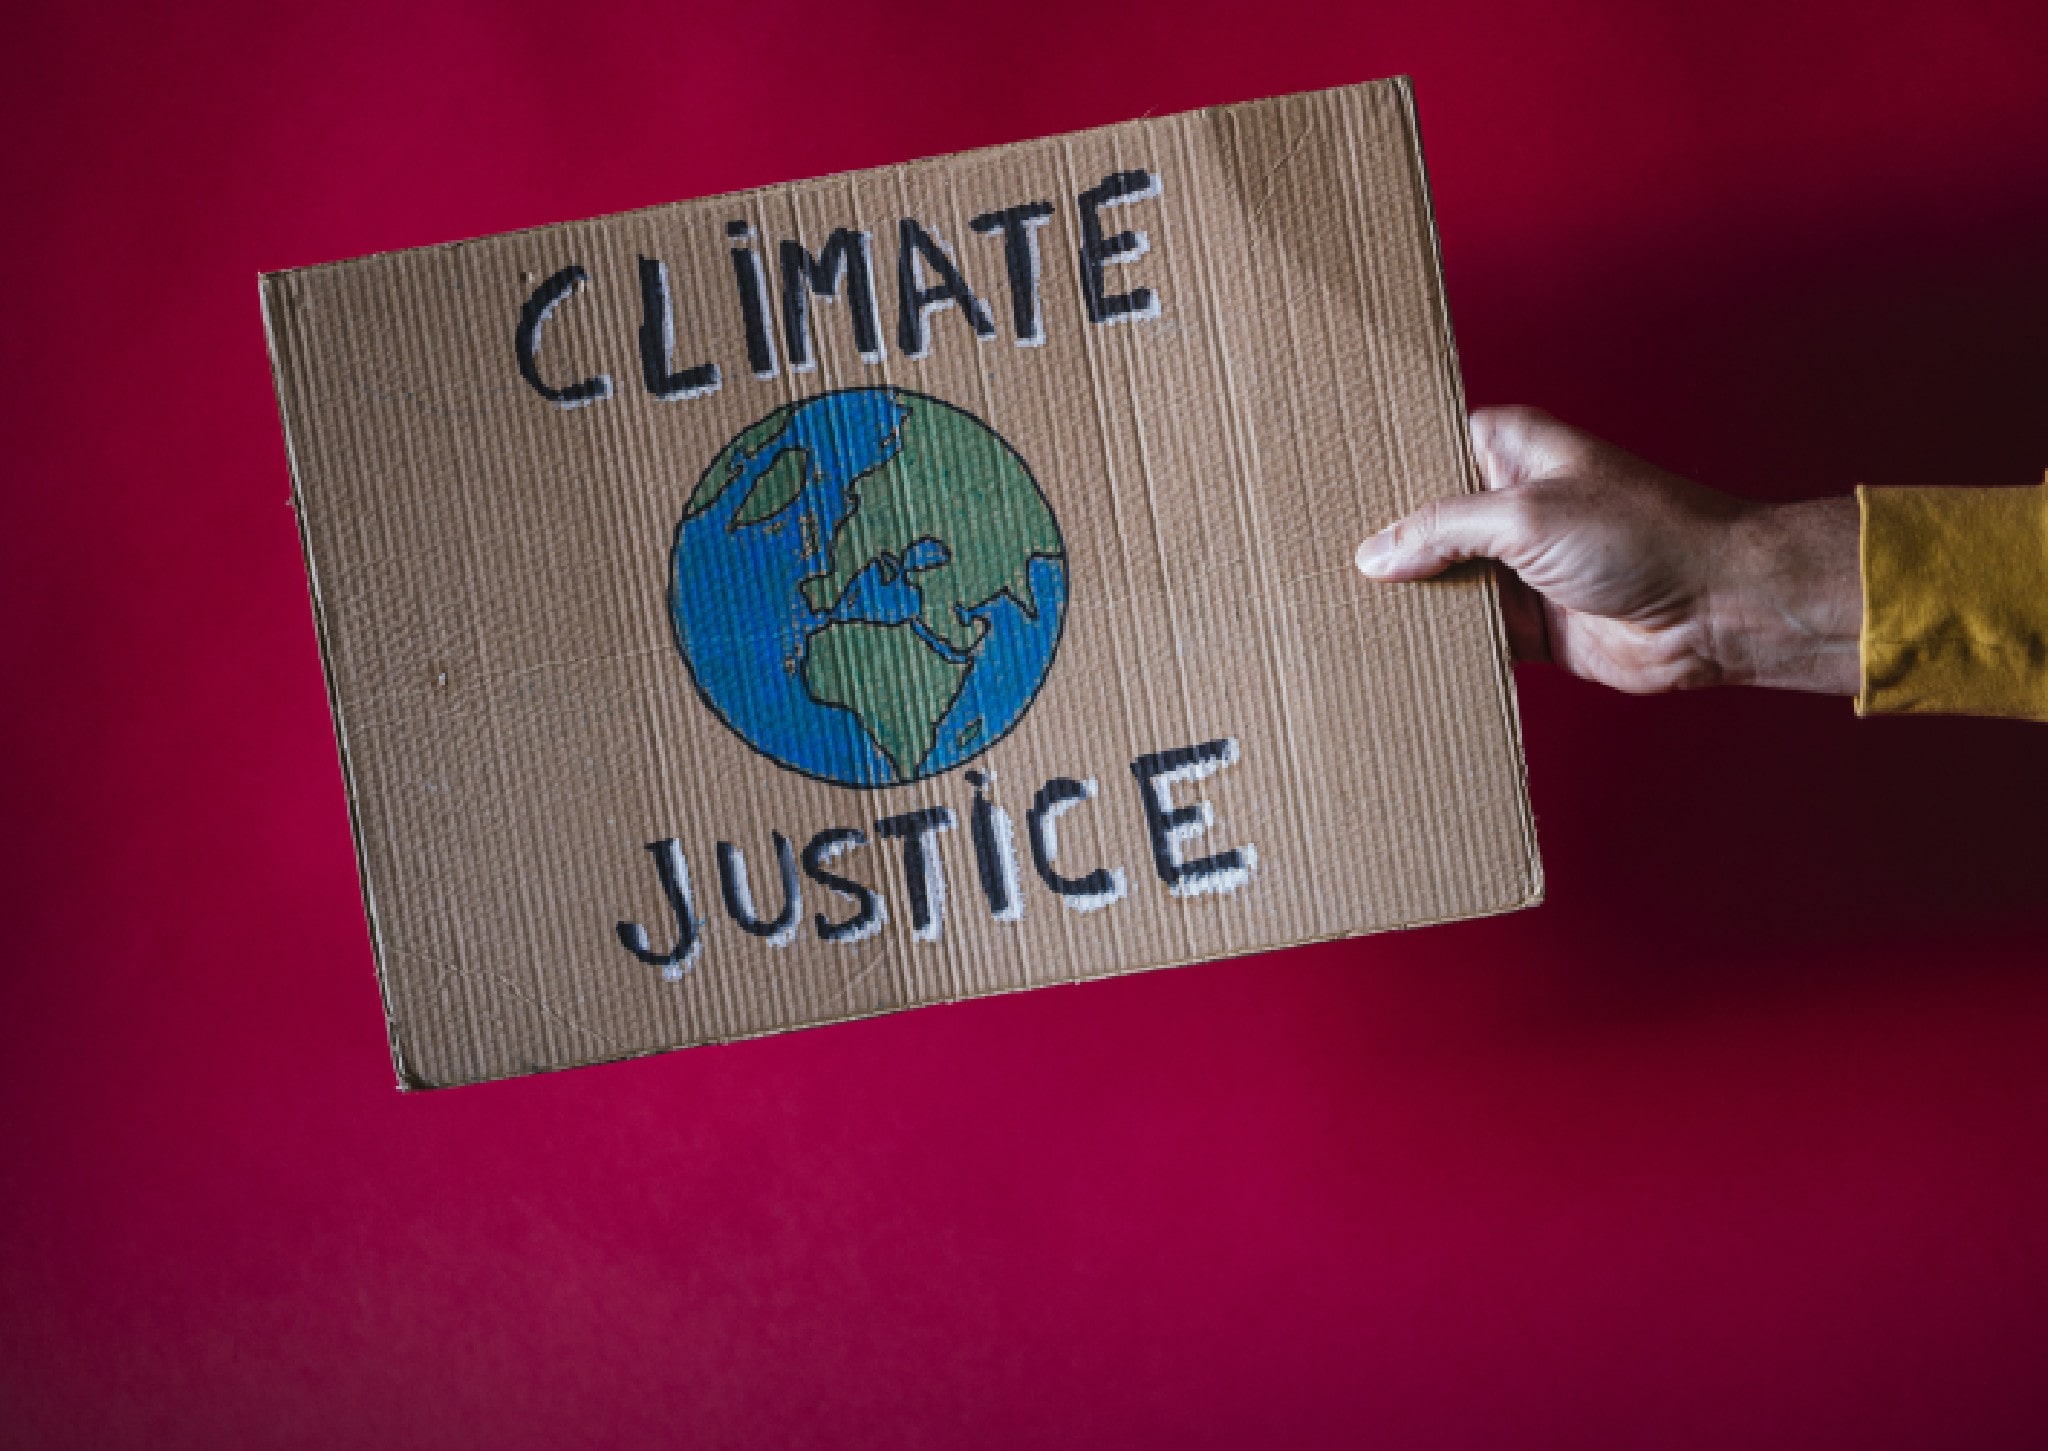 Negative effects of climate justice